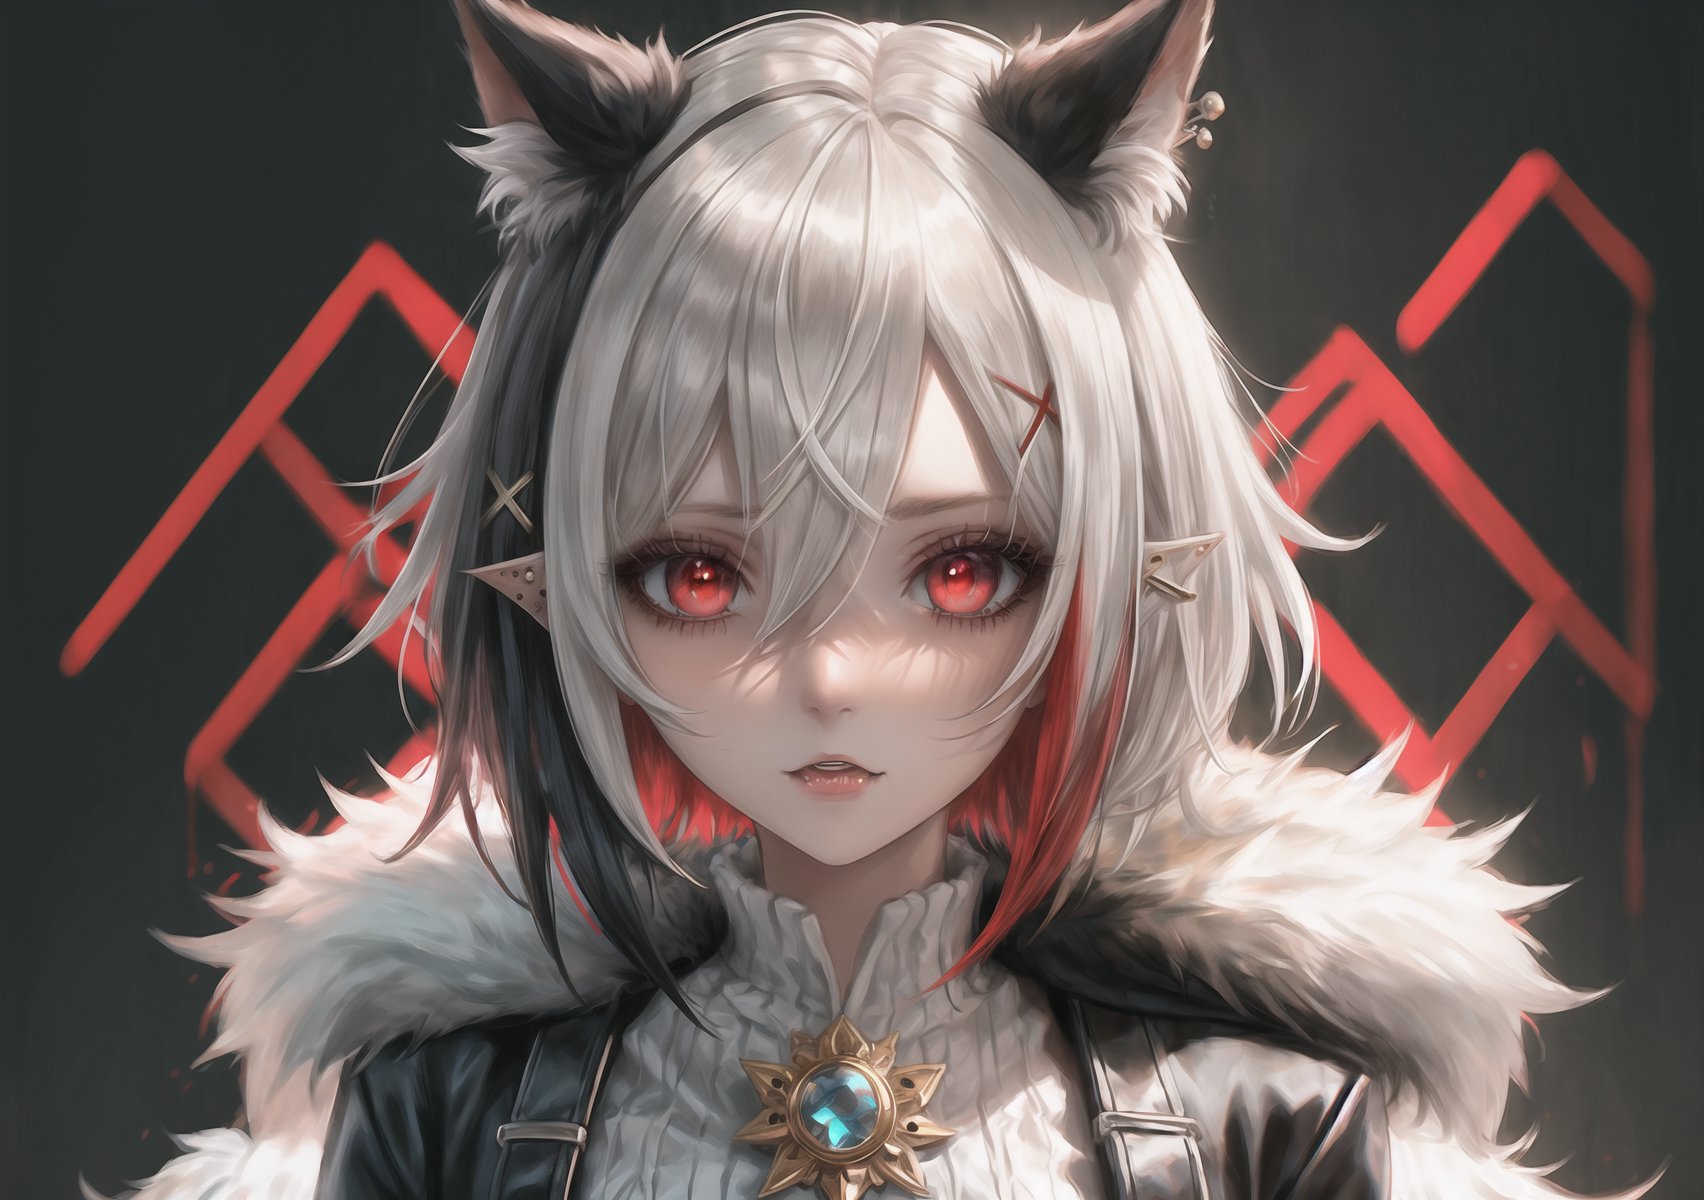 1 girl, black_eyes, coat, piercing_ears, fur coat, clipped feet, gloves, hair_between_eyes, high resolution, multicolored_hair, red_pupils, short_hair, side bangs, solo, highlighted_hair, two_tone_hair, white_gloves, white_hair, x-shaped_pupils, black_hair, blurred , brooch, cloak, dark_background, depth_of_field, fur-trimmed coat, fur trim, hair_between_eyes, high-res, jewelry, looking_at_viewer, multicolored_hair, portrait, red_eyes, shorthair, solo, streaked_hair, symbol_pupils, two-tone_hair, white_coat, white_hair, x-shaped_pupils